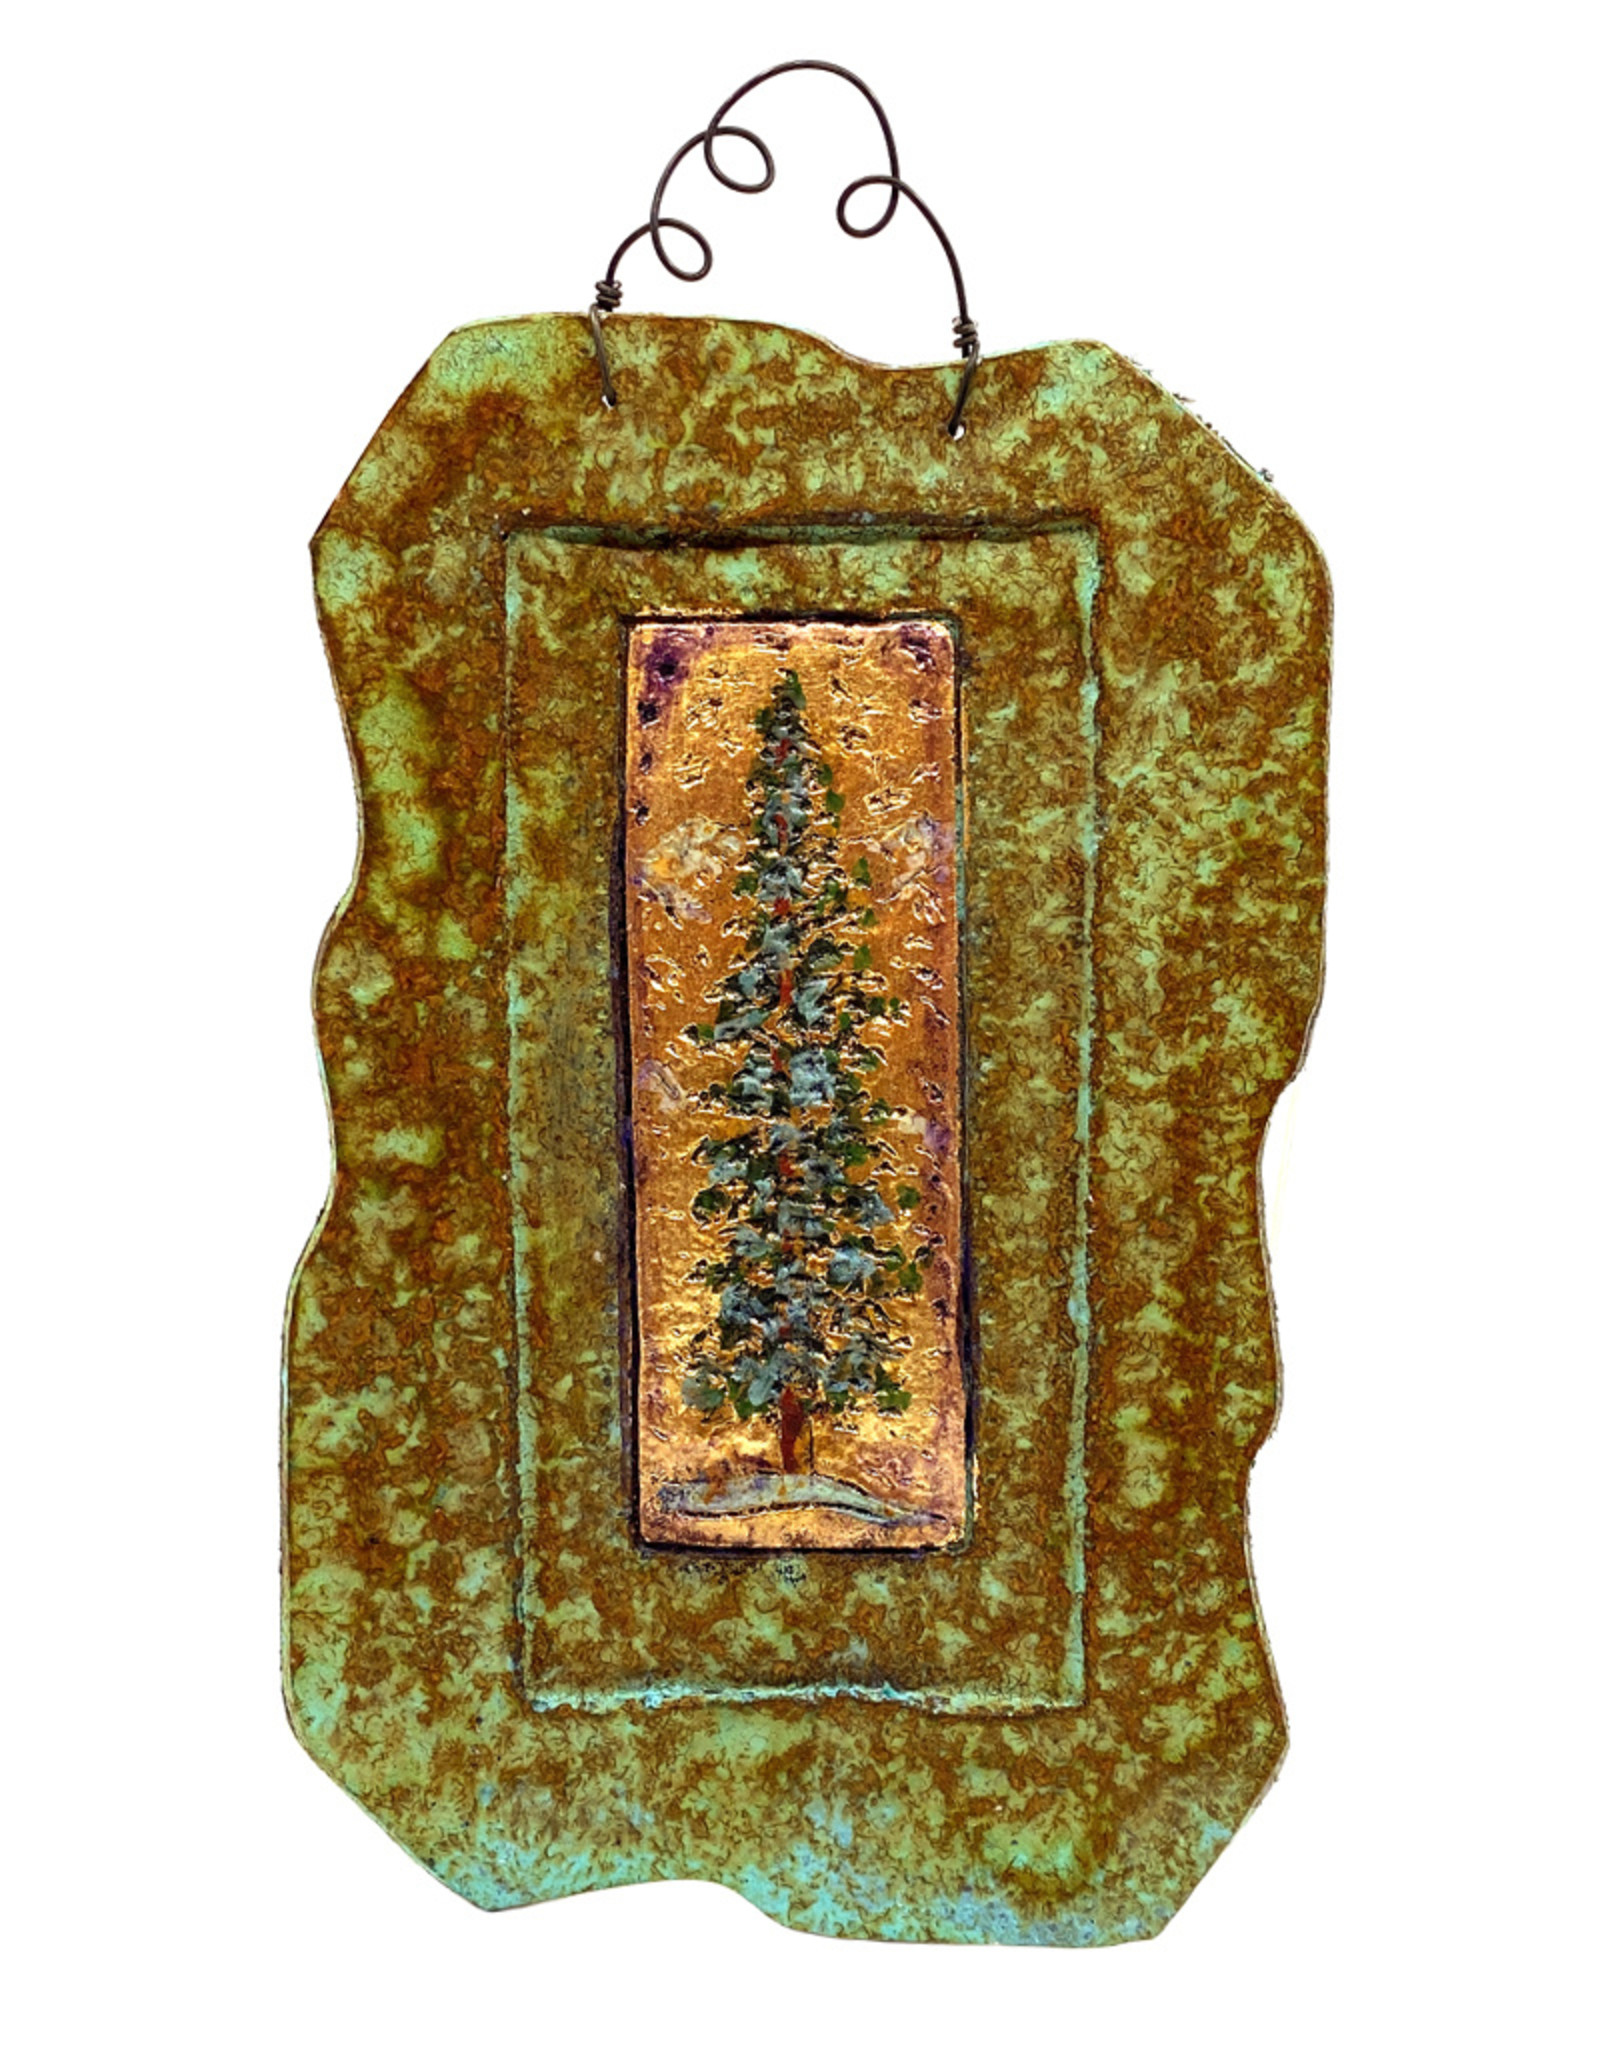 PAPER & STONE SMALL REDWOOD TREE WALL PLAQUE